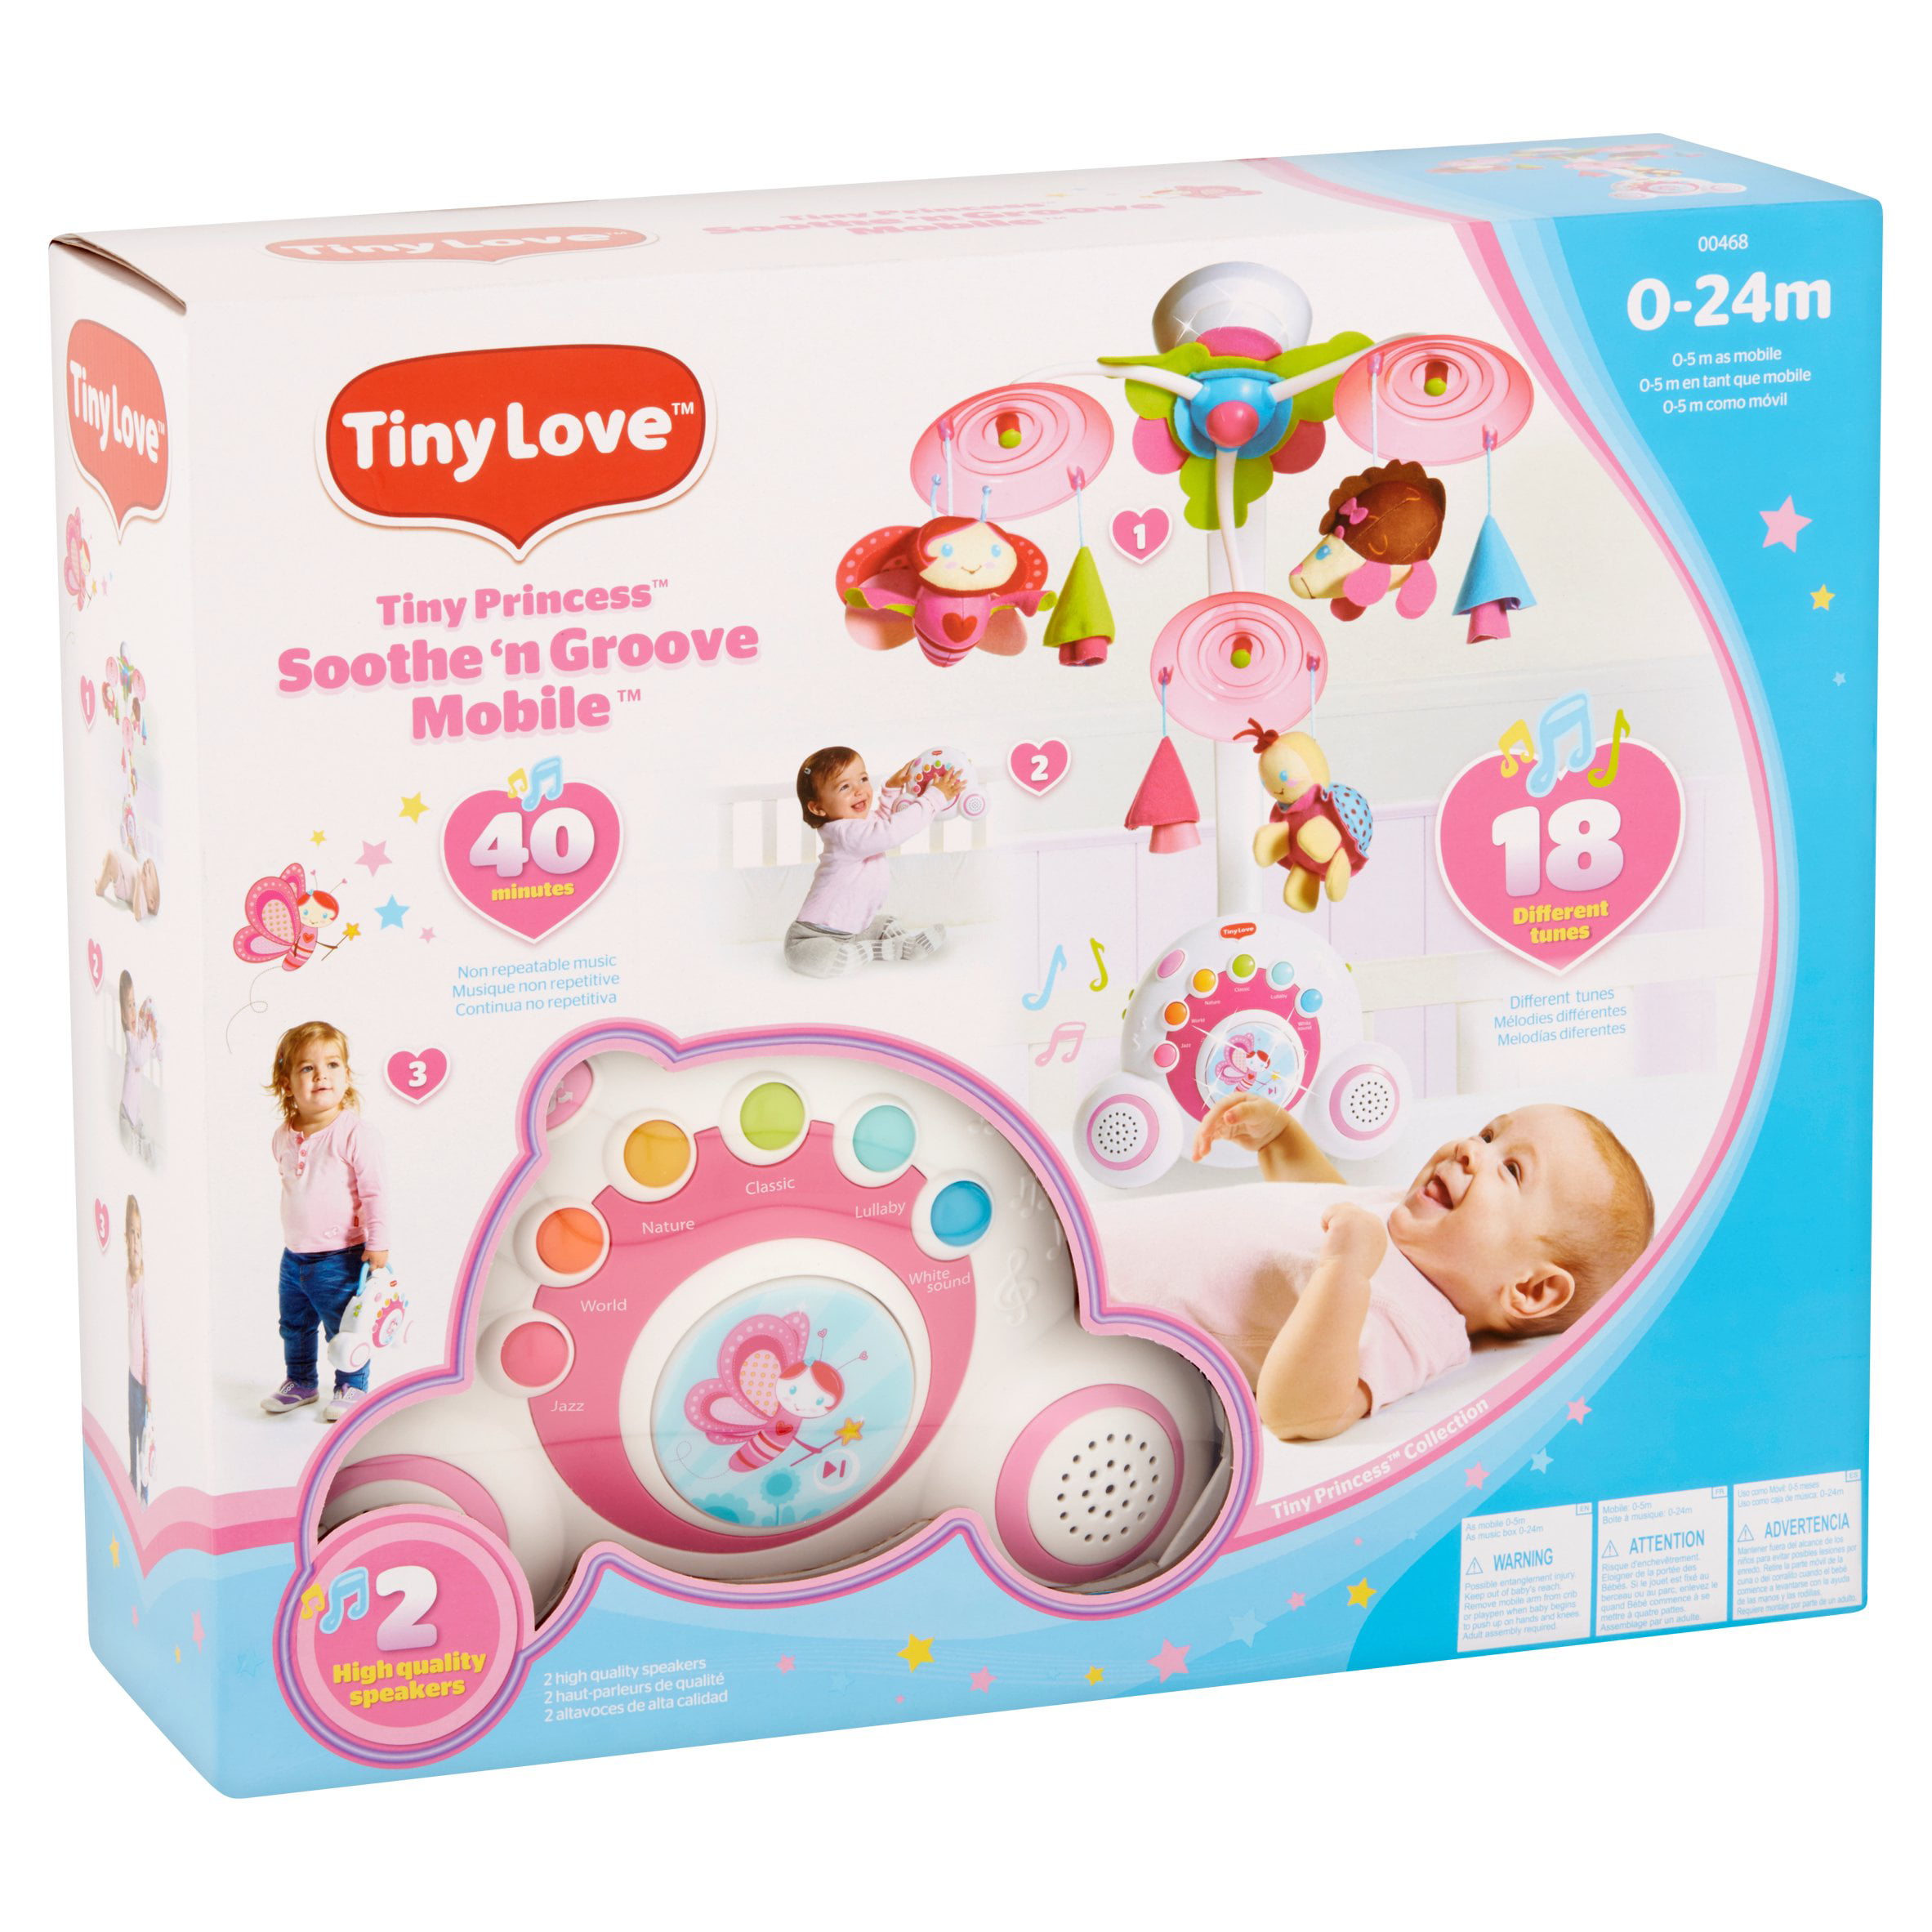 movil-cuna-tiny-pricess-tales-soothe-groove-tiny-love con 40 minutos de  musica